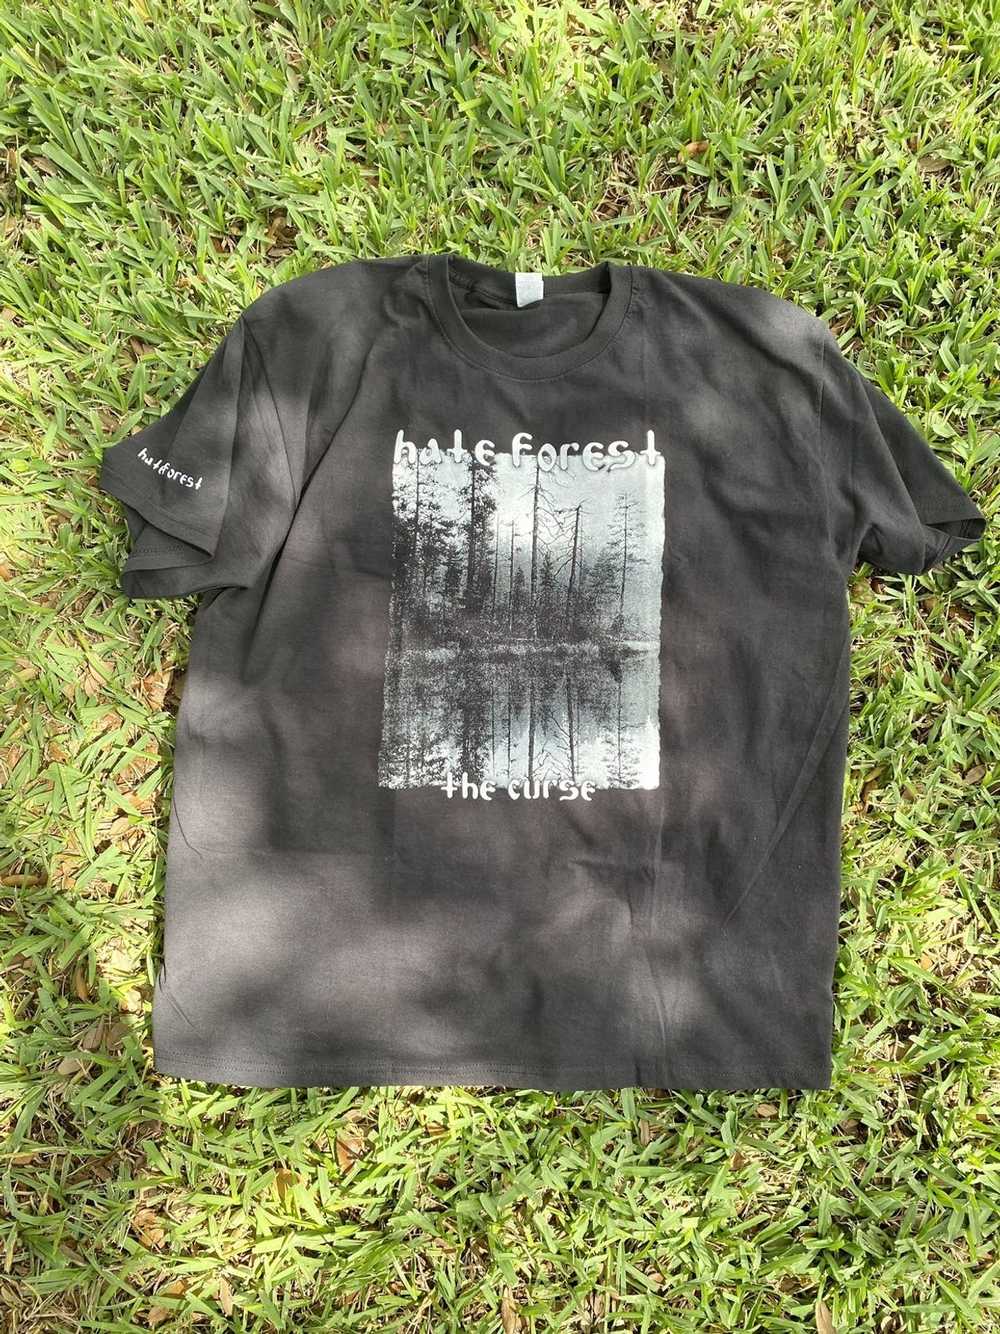 Band Tees Hate Forest - image 1